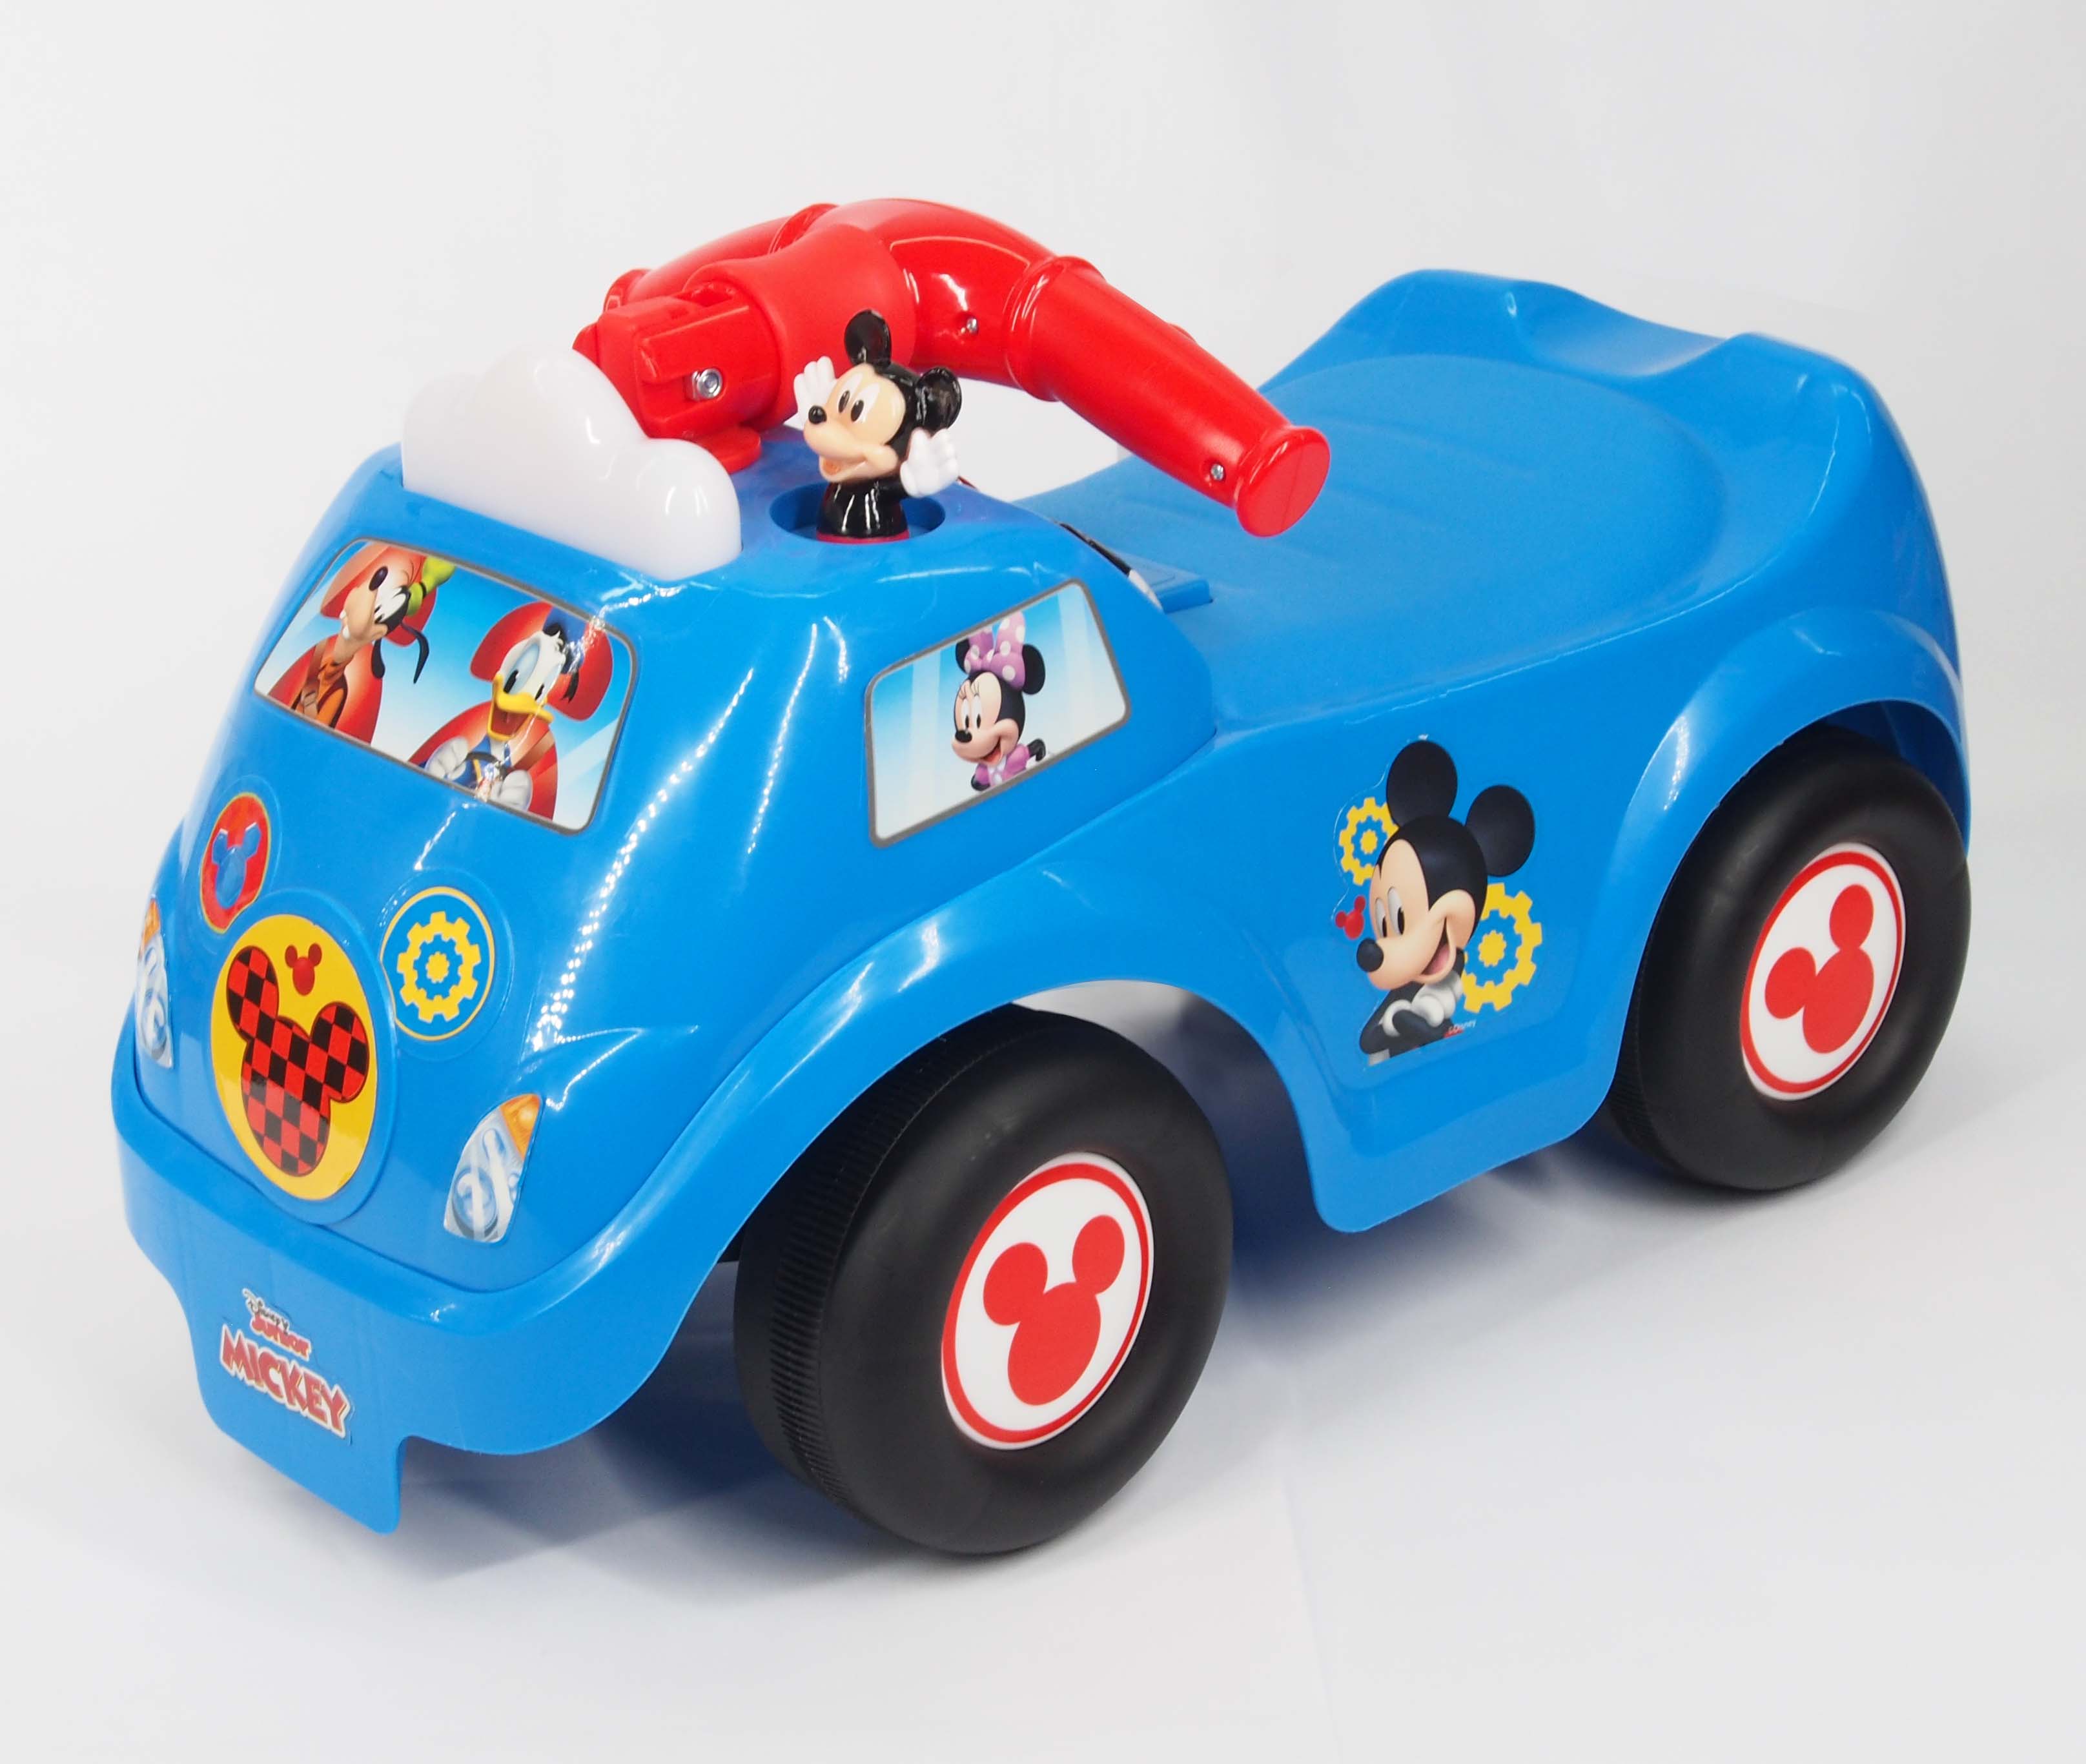 Disney Mickey Mouse Lights N' Sounds Activity Ride-On - image 5 of 8